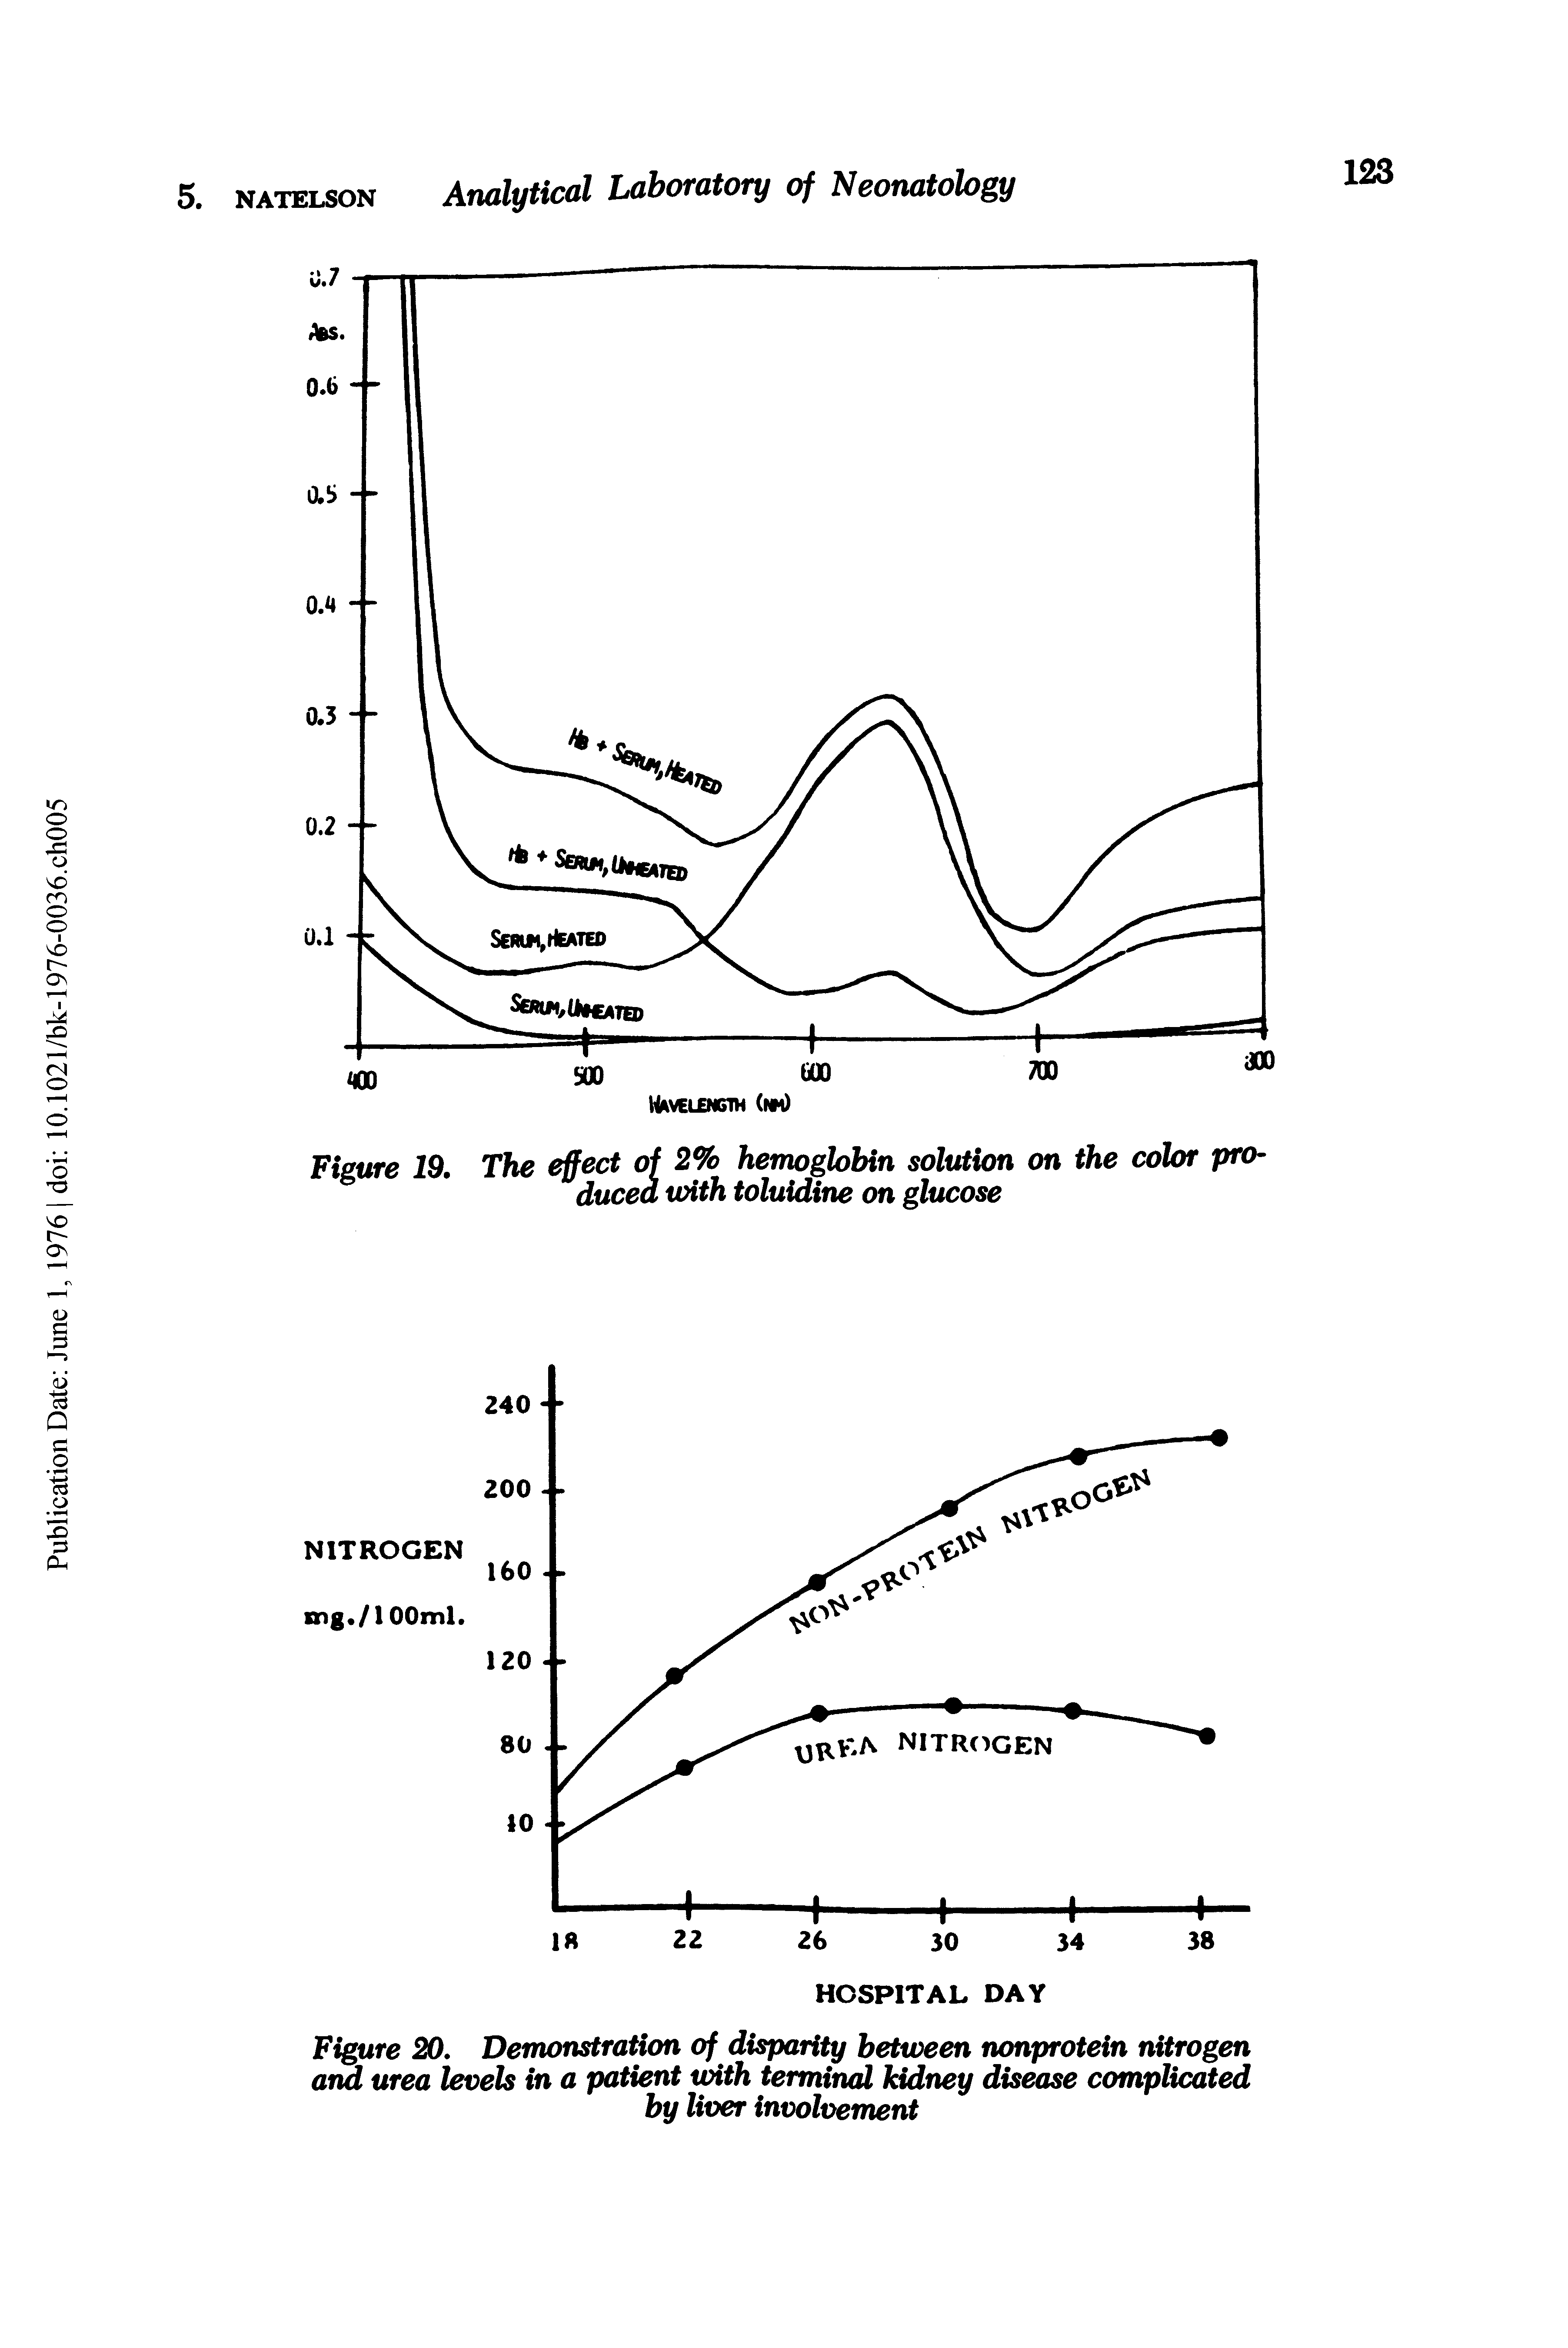 Figure 20, Demonstration of disparity between nonprotein nitrogen and urea levels in a patient with terminal kidney disease complicated by liver involvement...